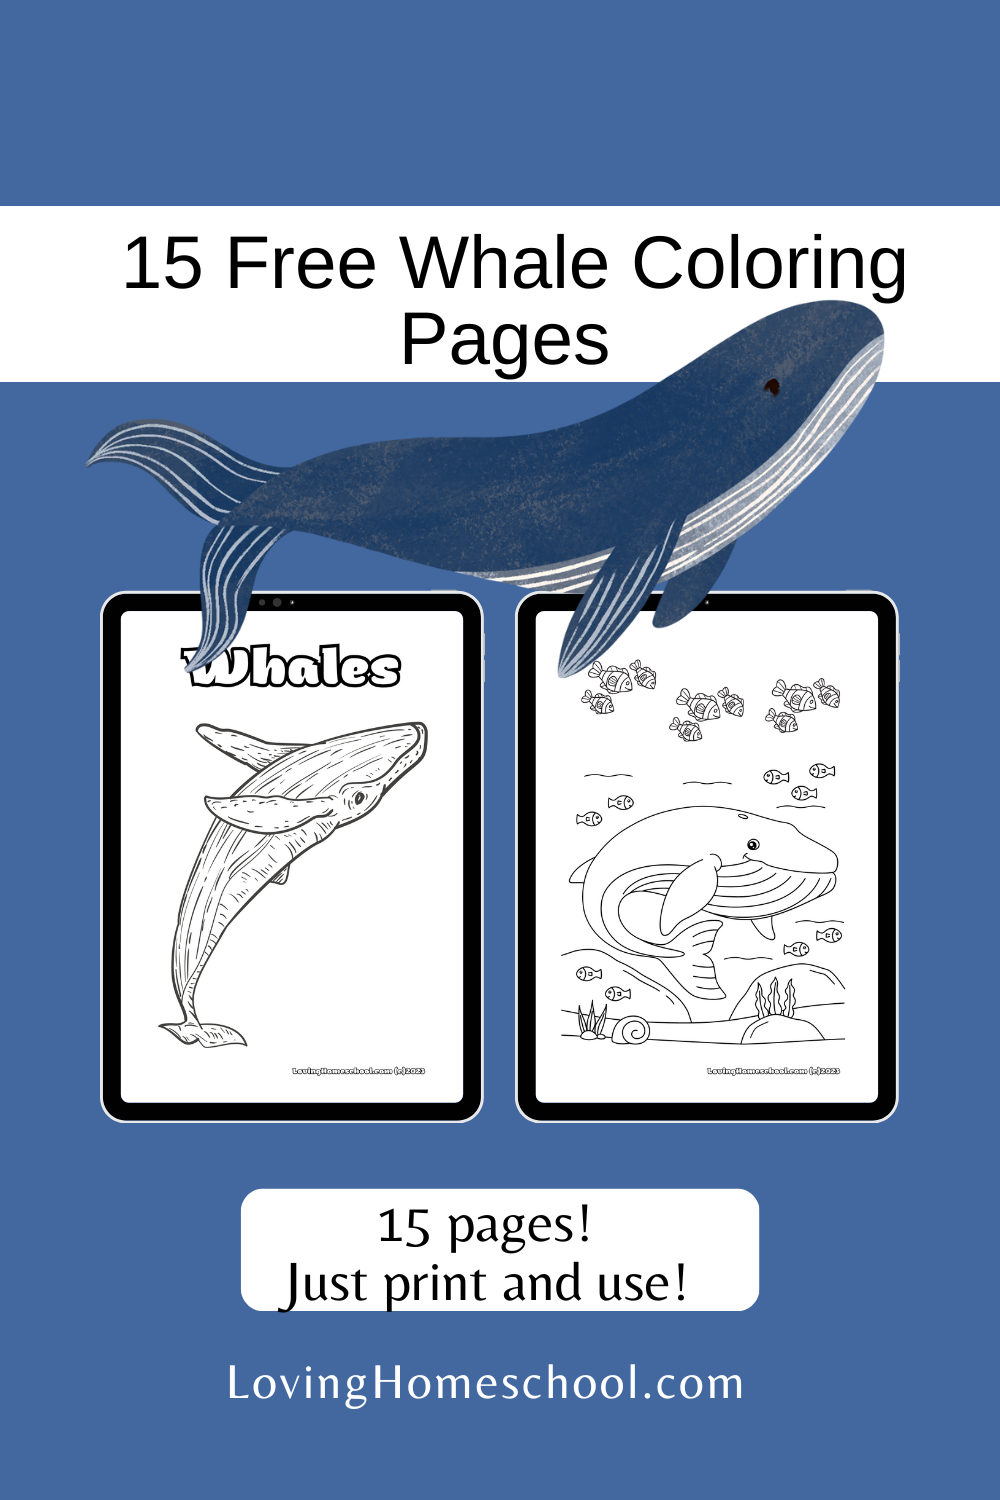 15 Free Whale Coloring Pages Pinterest Pin